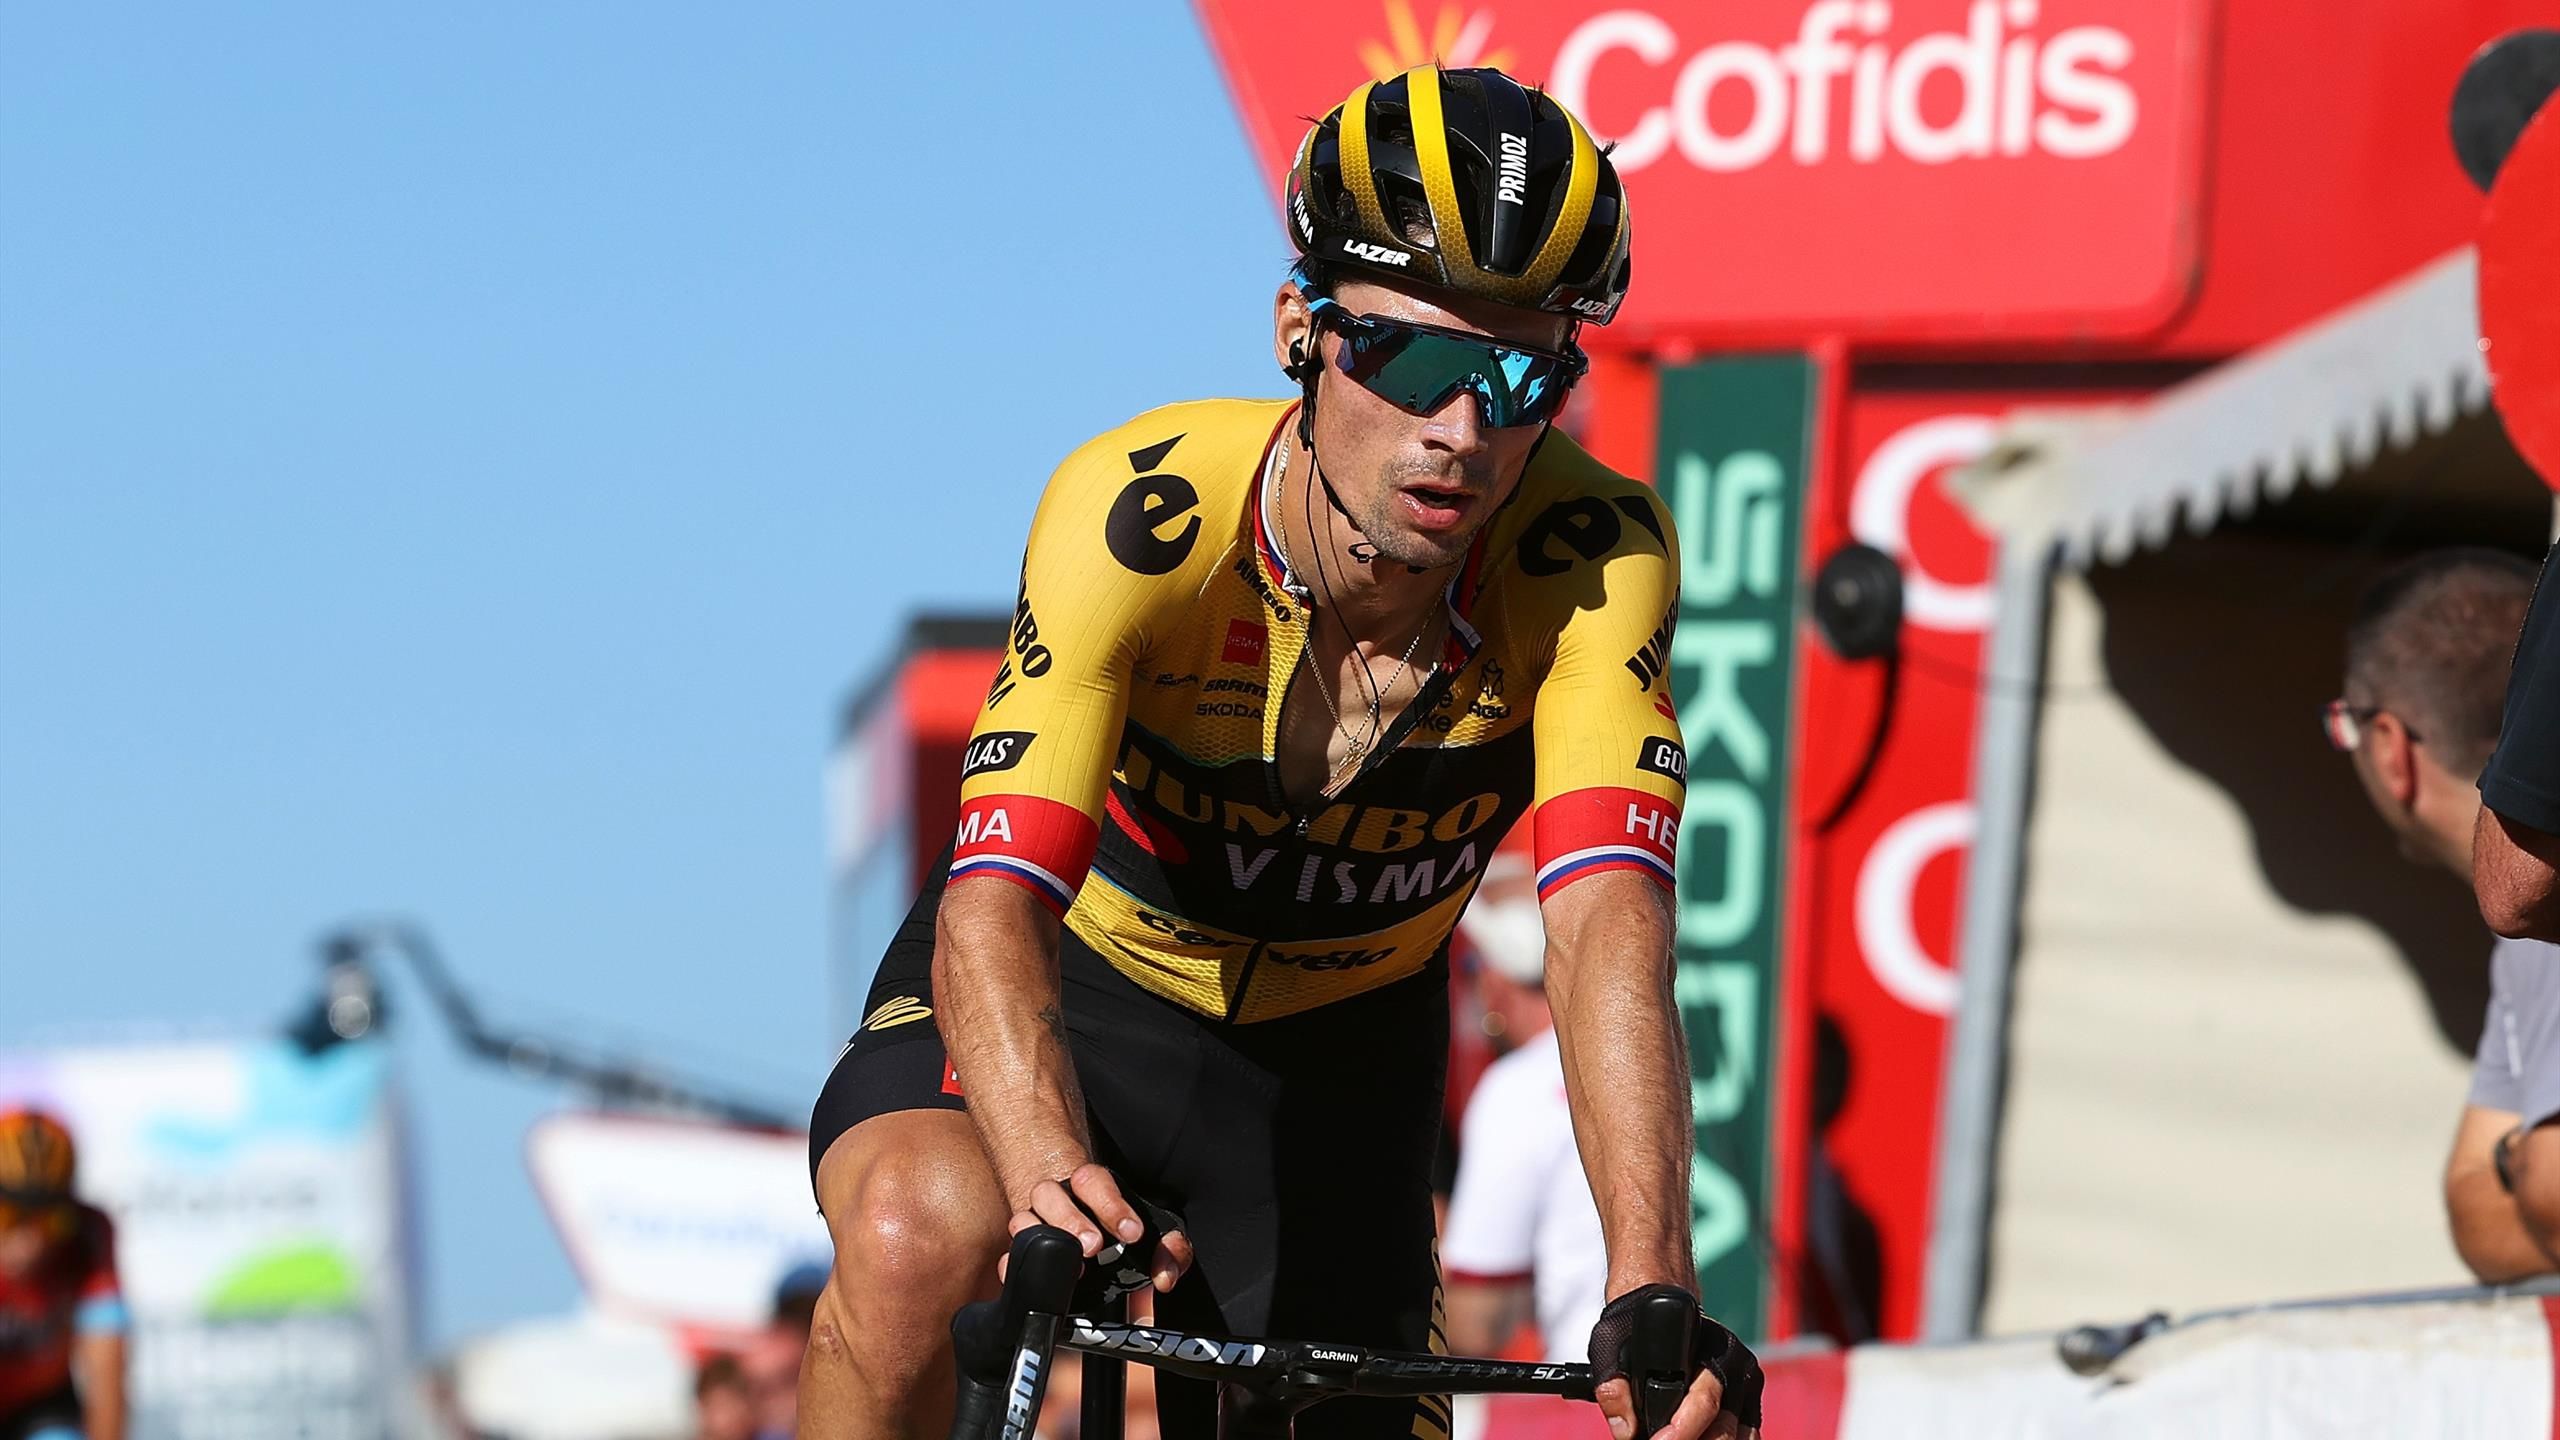 Primoz Roglic gives cryptic response after Jumbo-Visma ride for Sepp Kuss at Vuelta a Espana I have my own thoughts